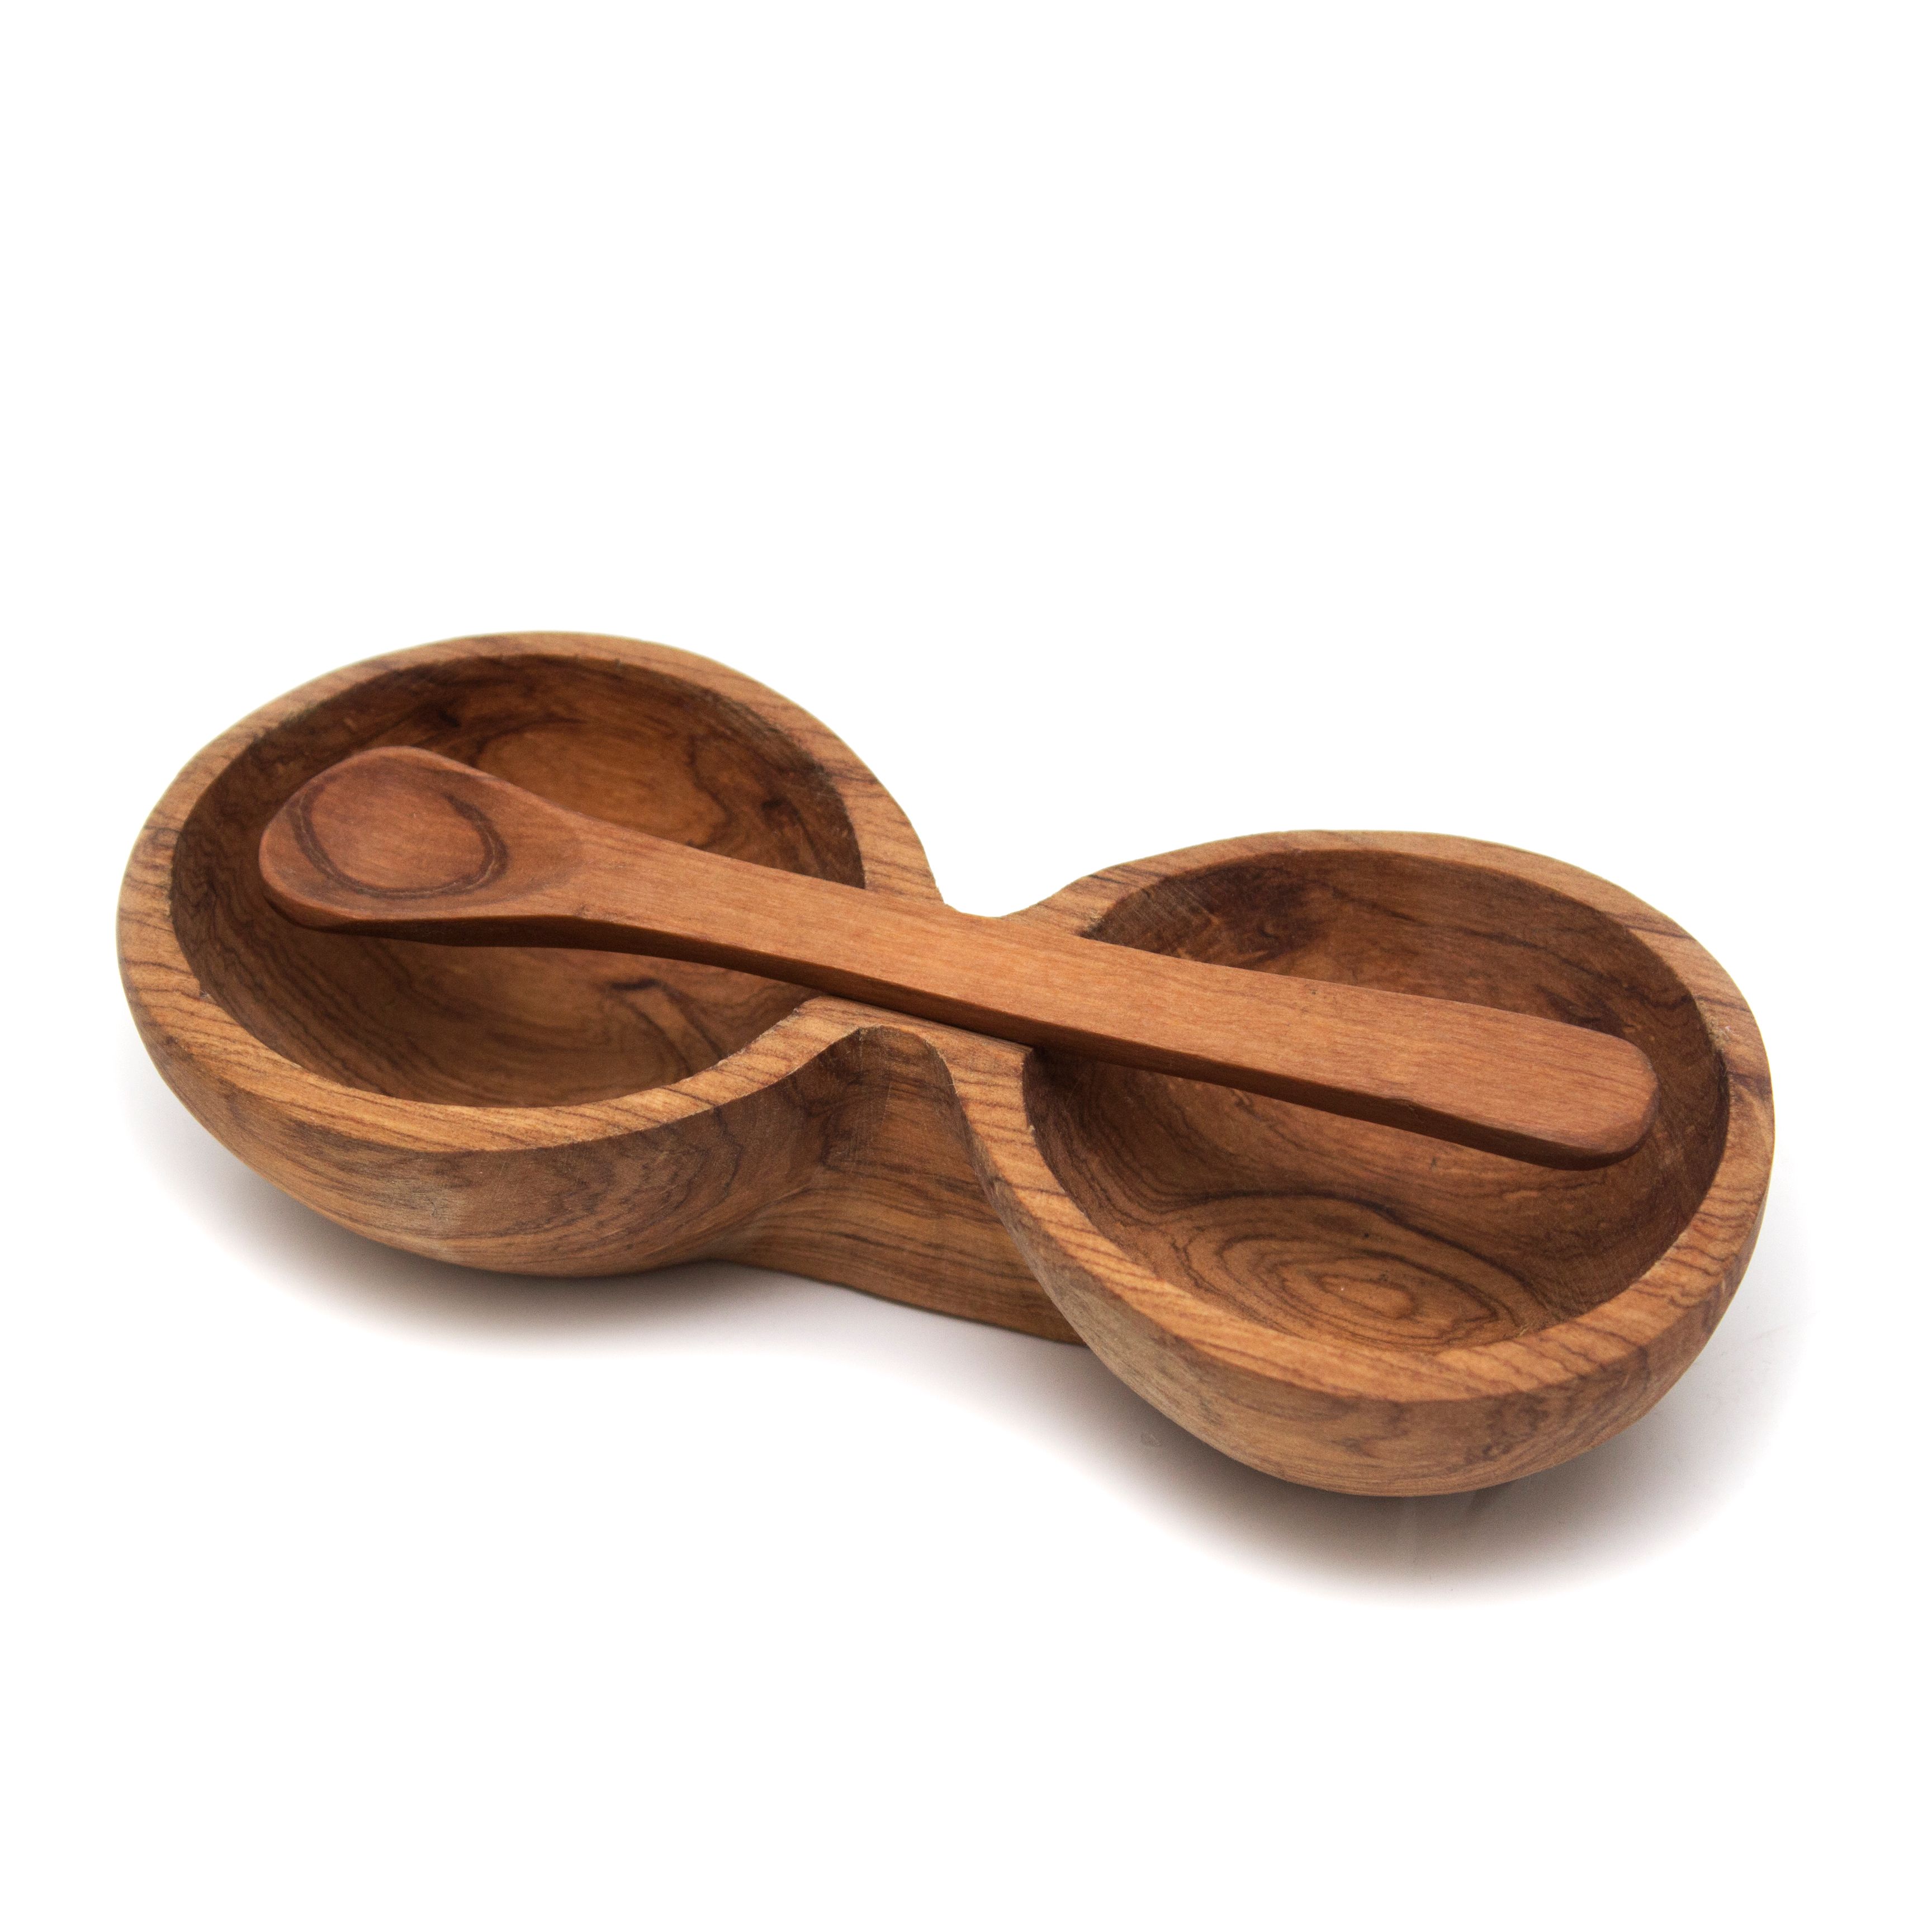 aarven-olive-wood-double-bowl-and-spoon-set